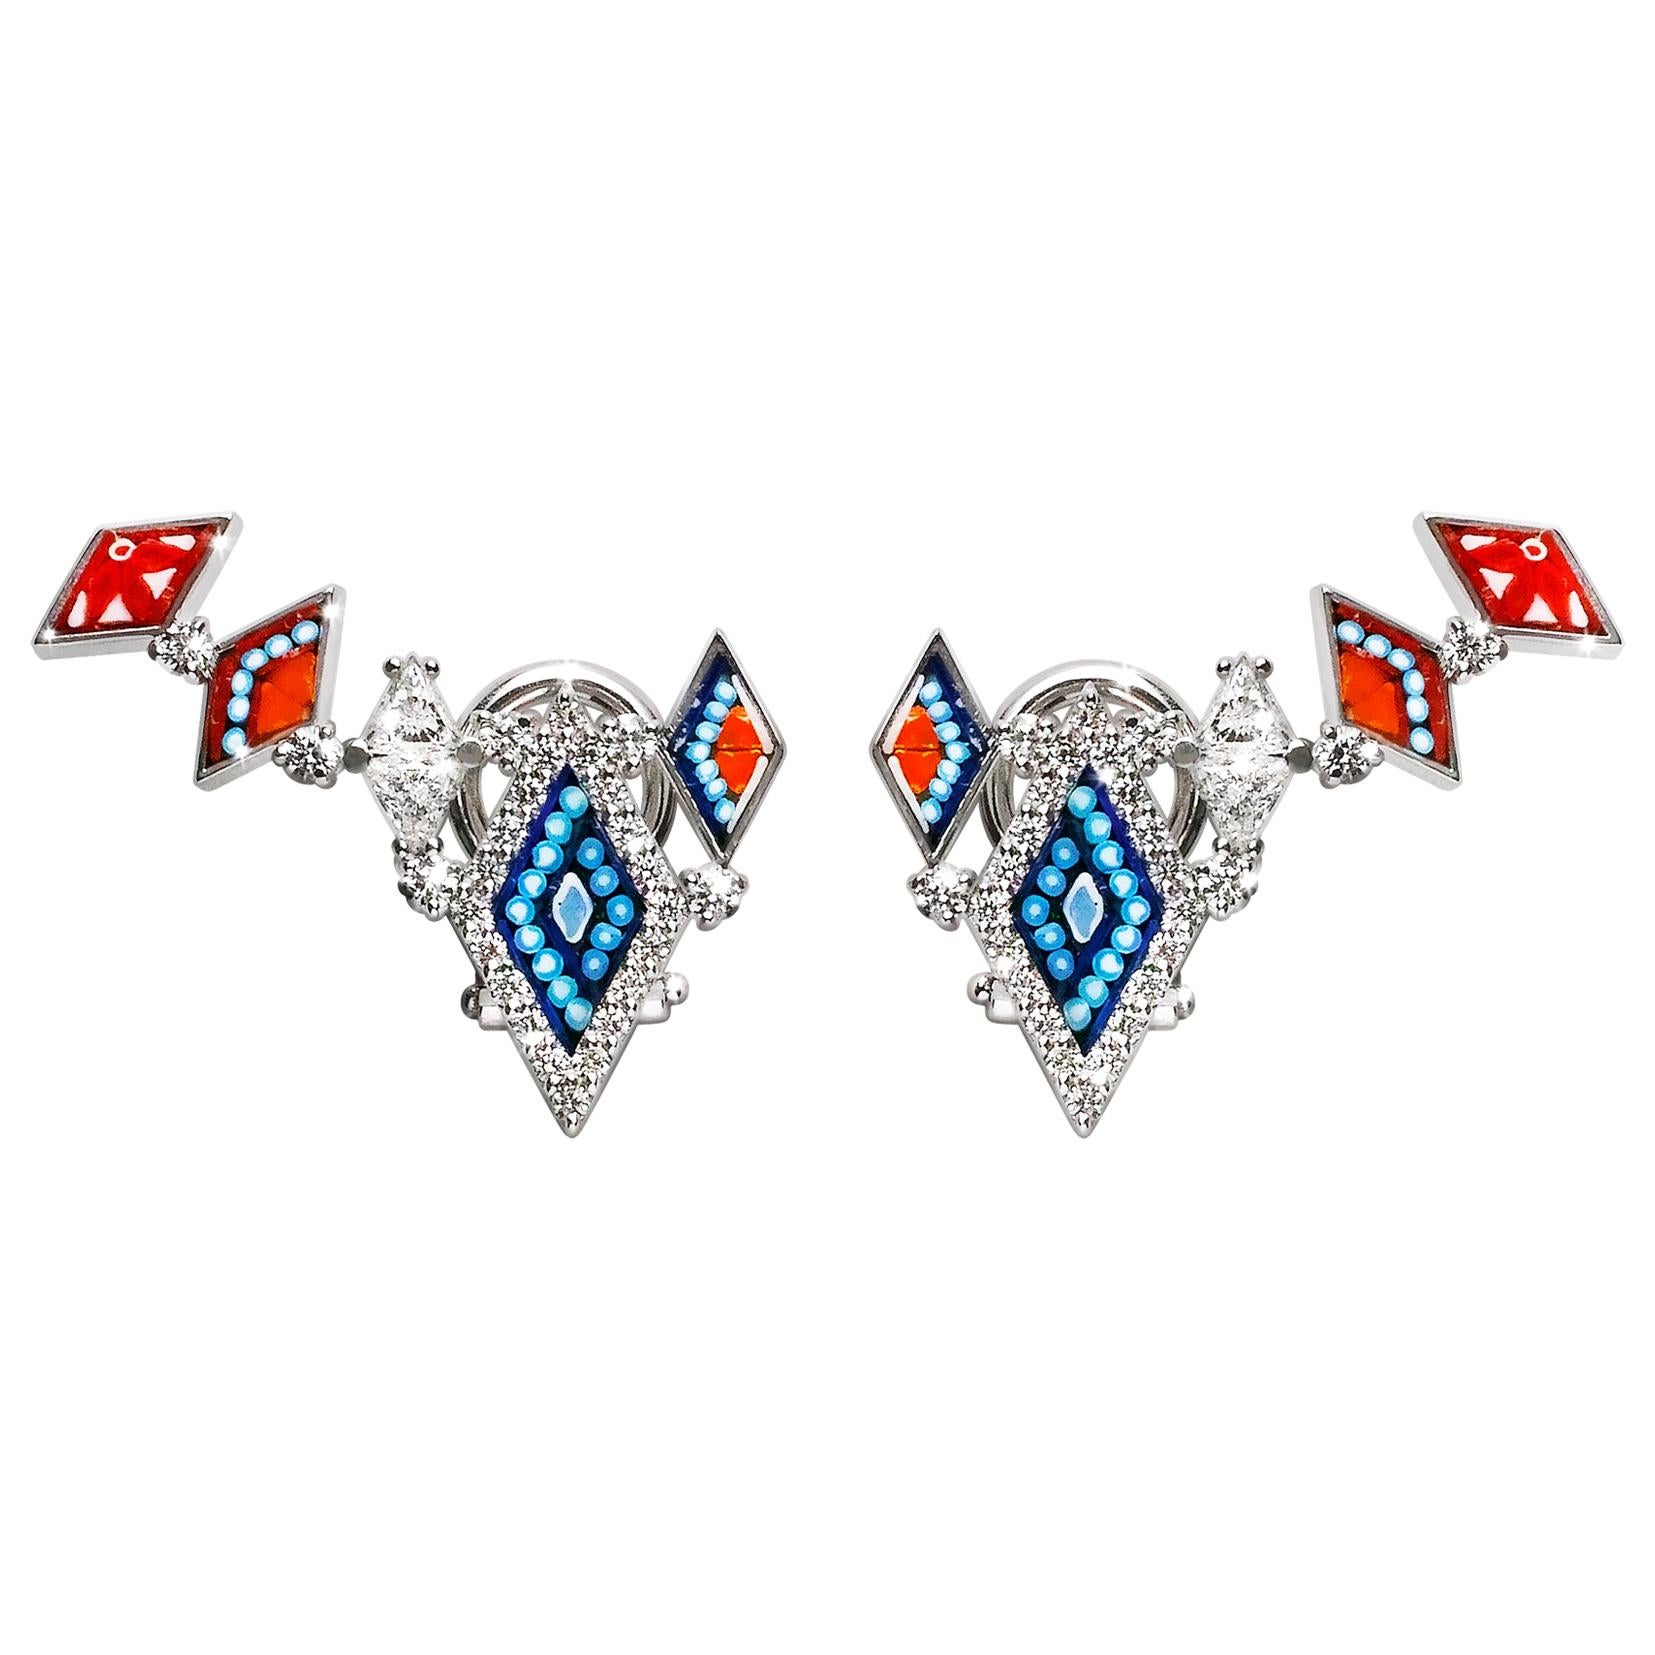 Stylish Earrings White Diamonds White Gold Hand Decorated with Micromosaic For Sale